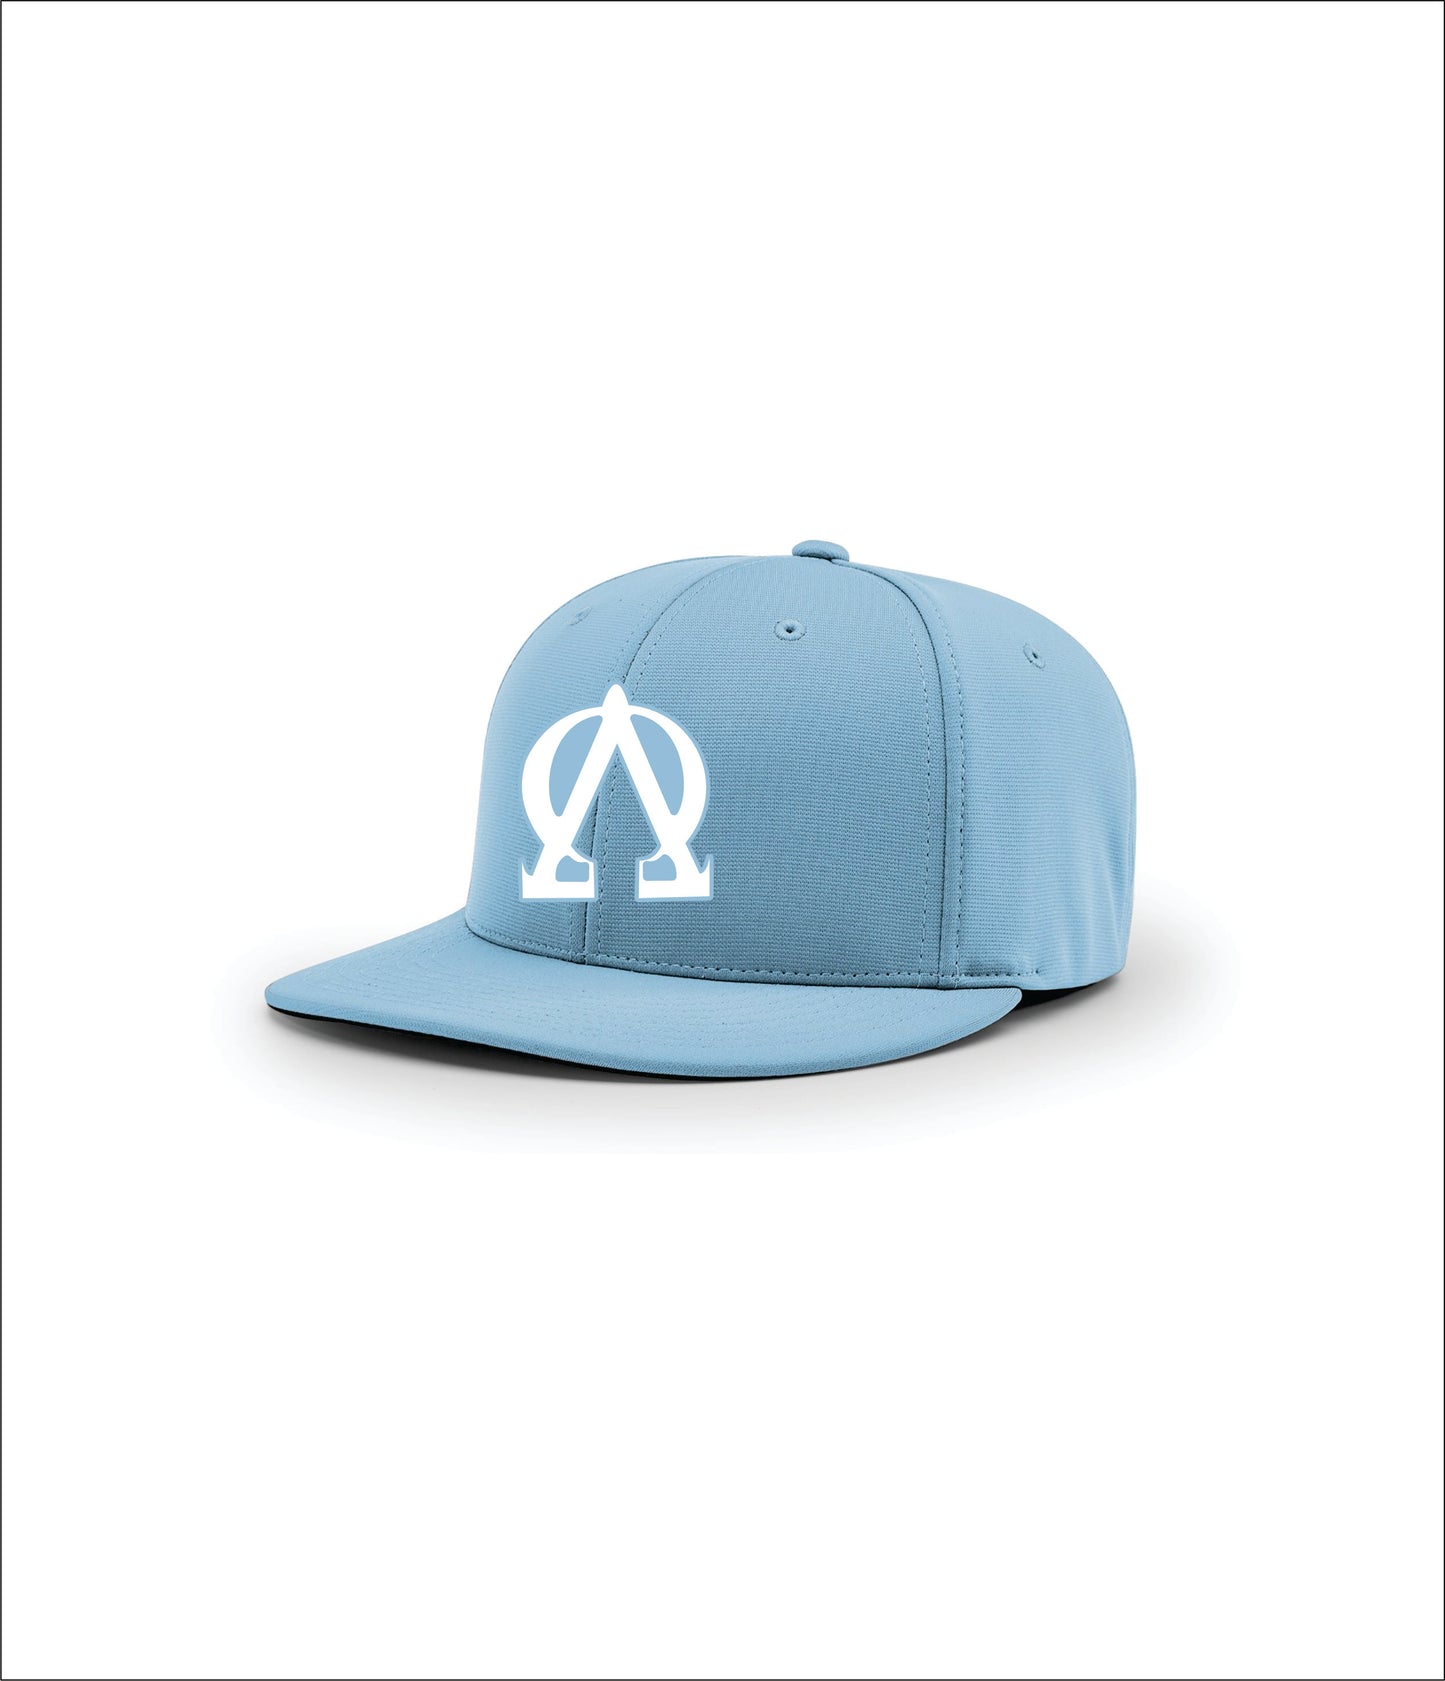 NORTHSIDE BASEBALL FITTED HAT